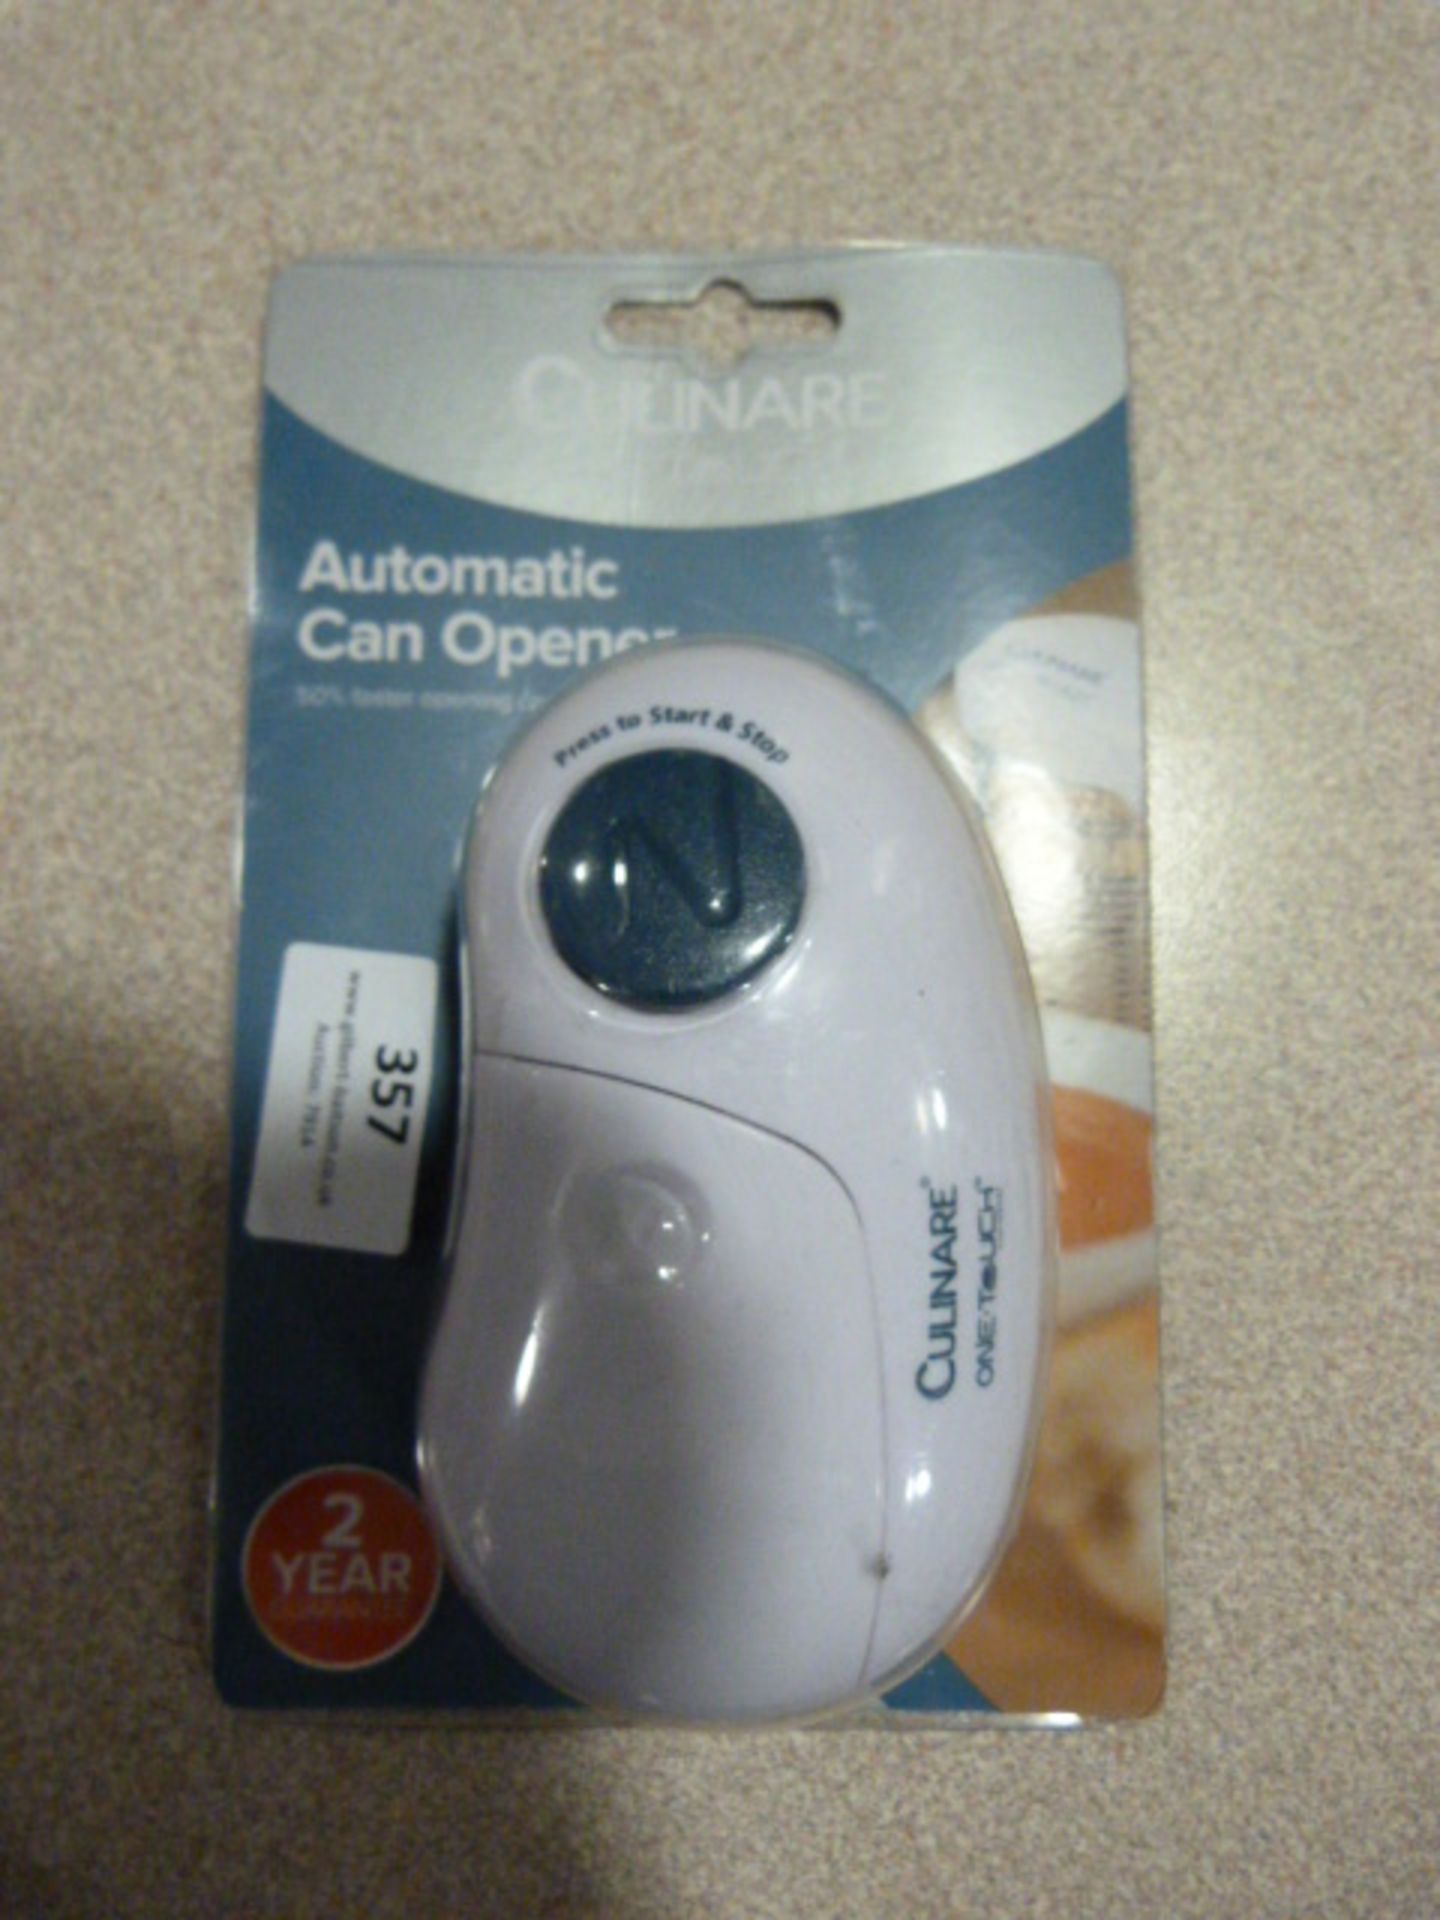 *Culinare Automatic Can Opener